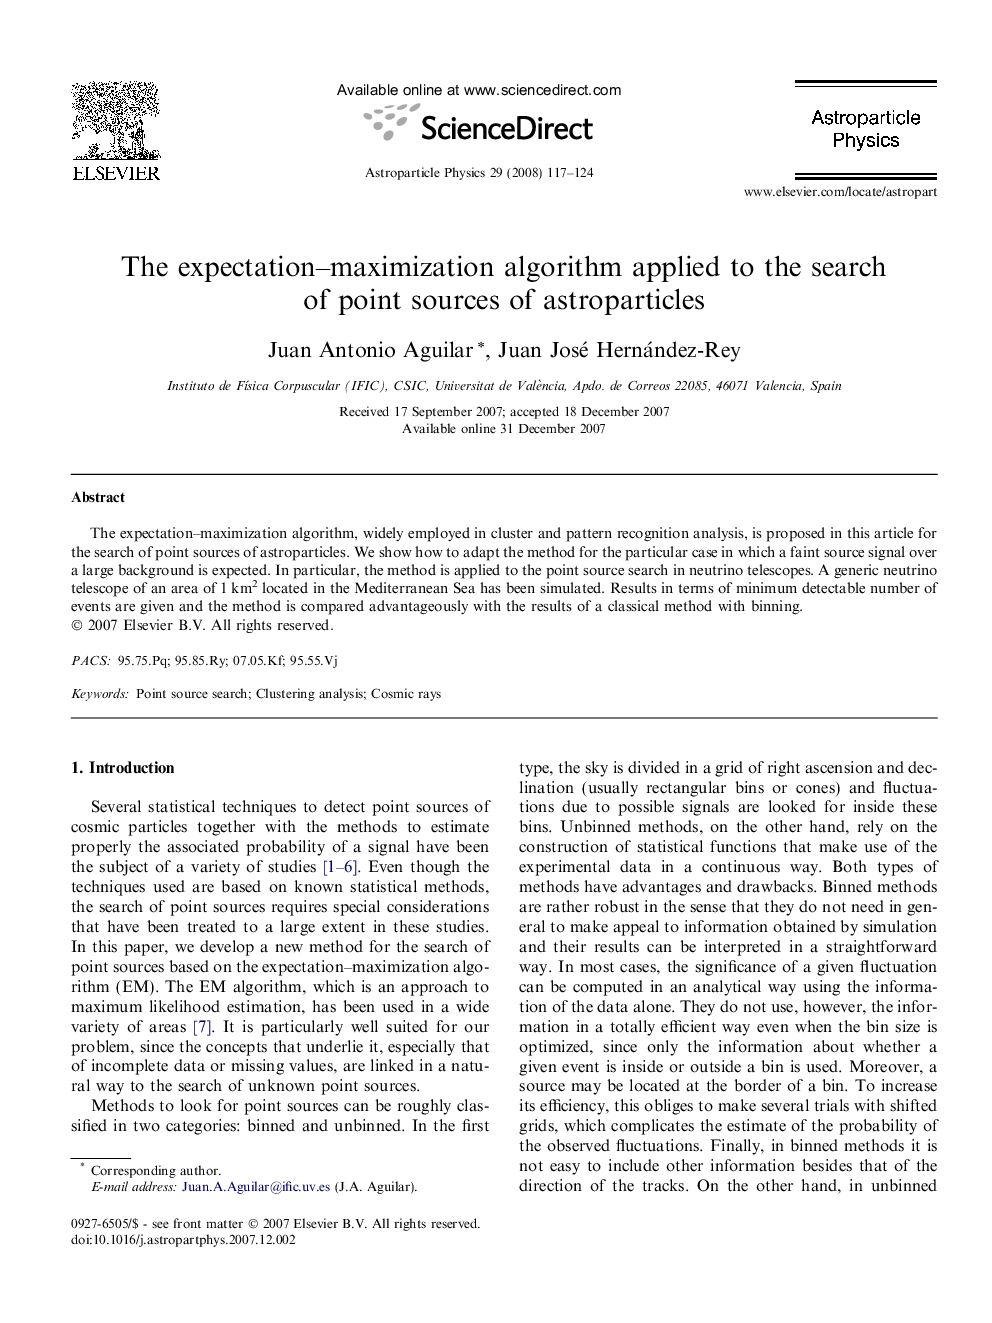 The expectation-maximization algorithm applied to the search of point sources of astroparticles